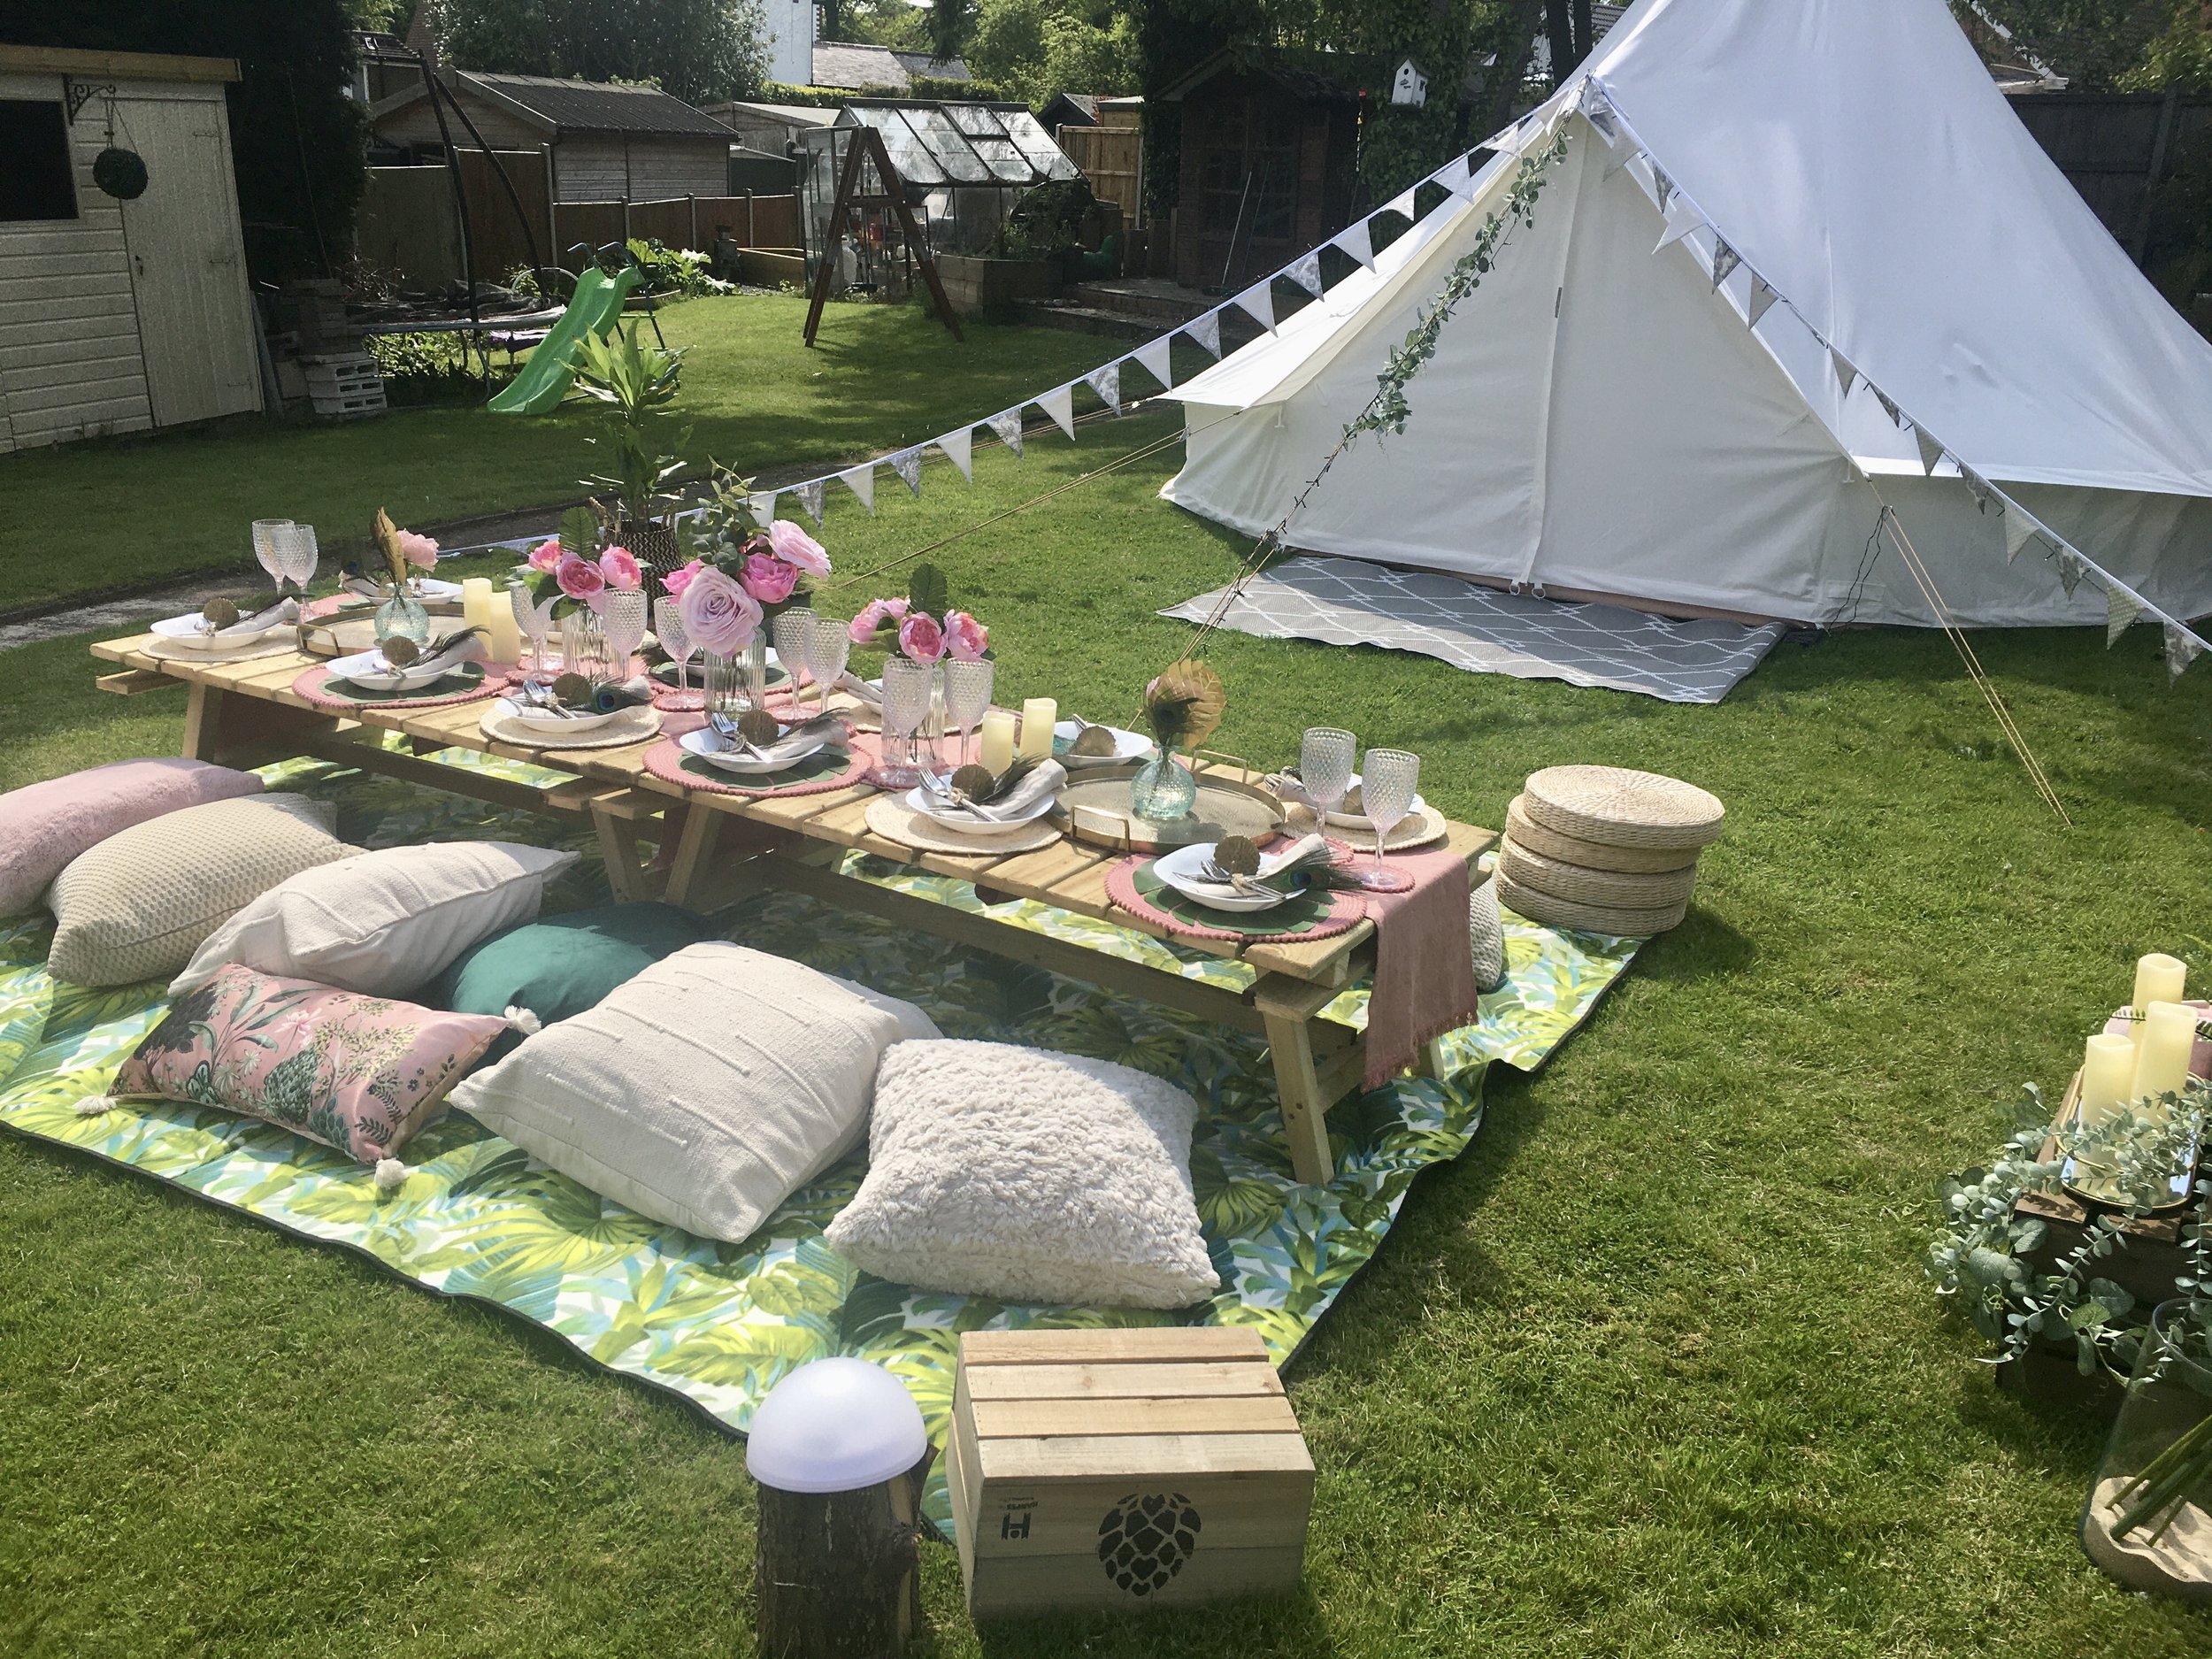 Perfectly Pitched Events - Sleepover Party Tents in Leicestershire